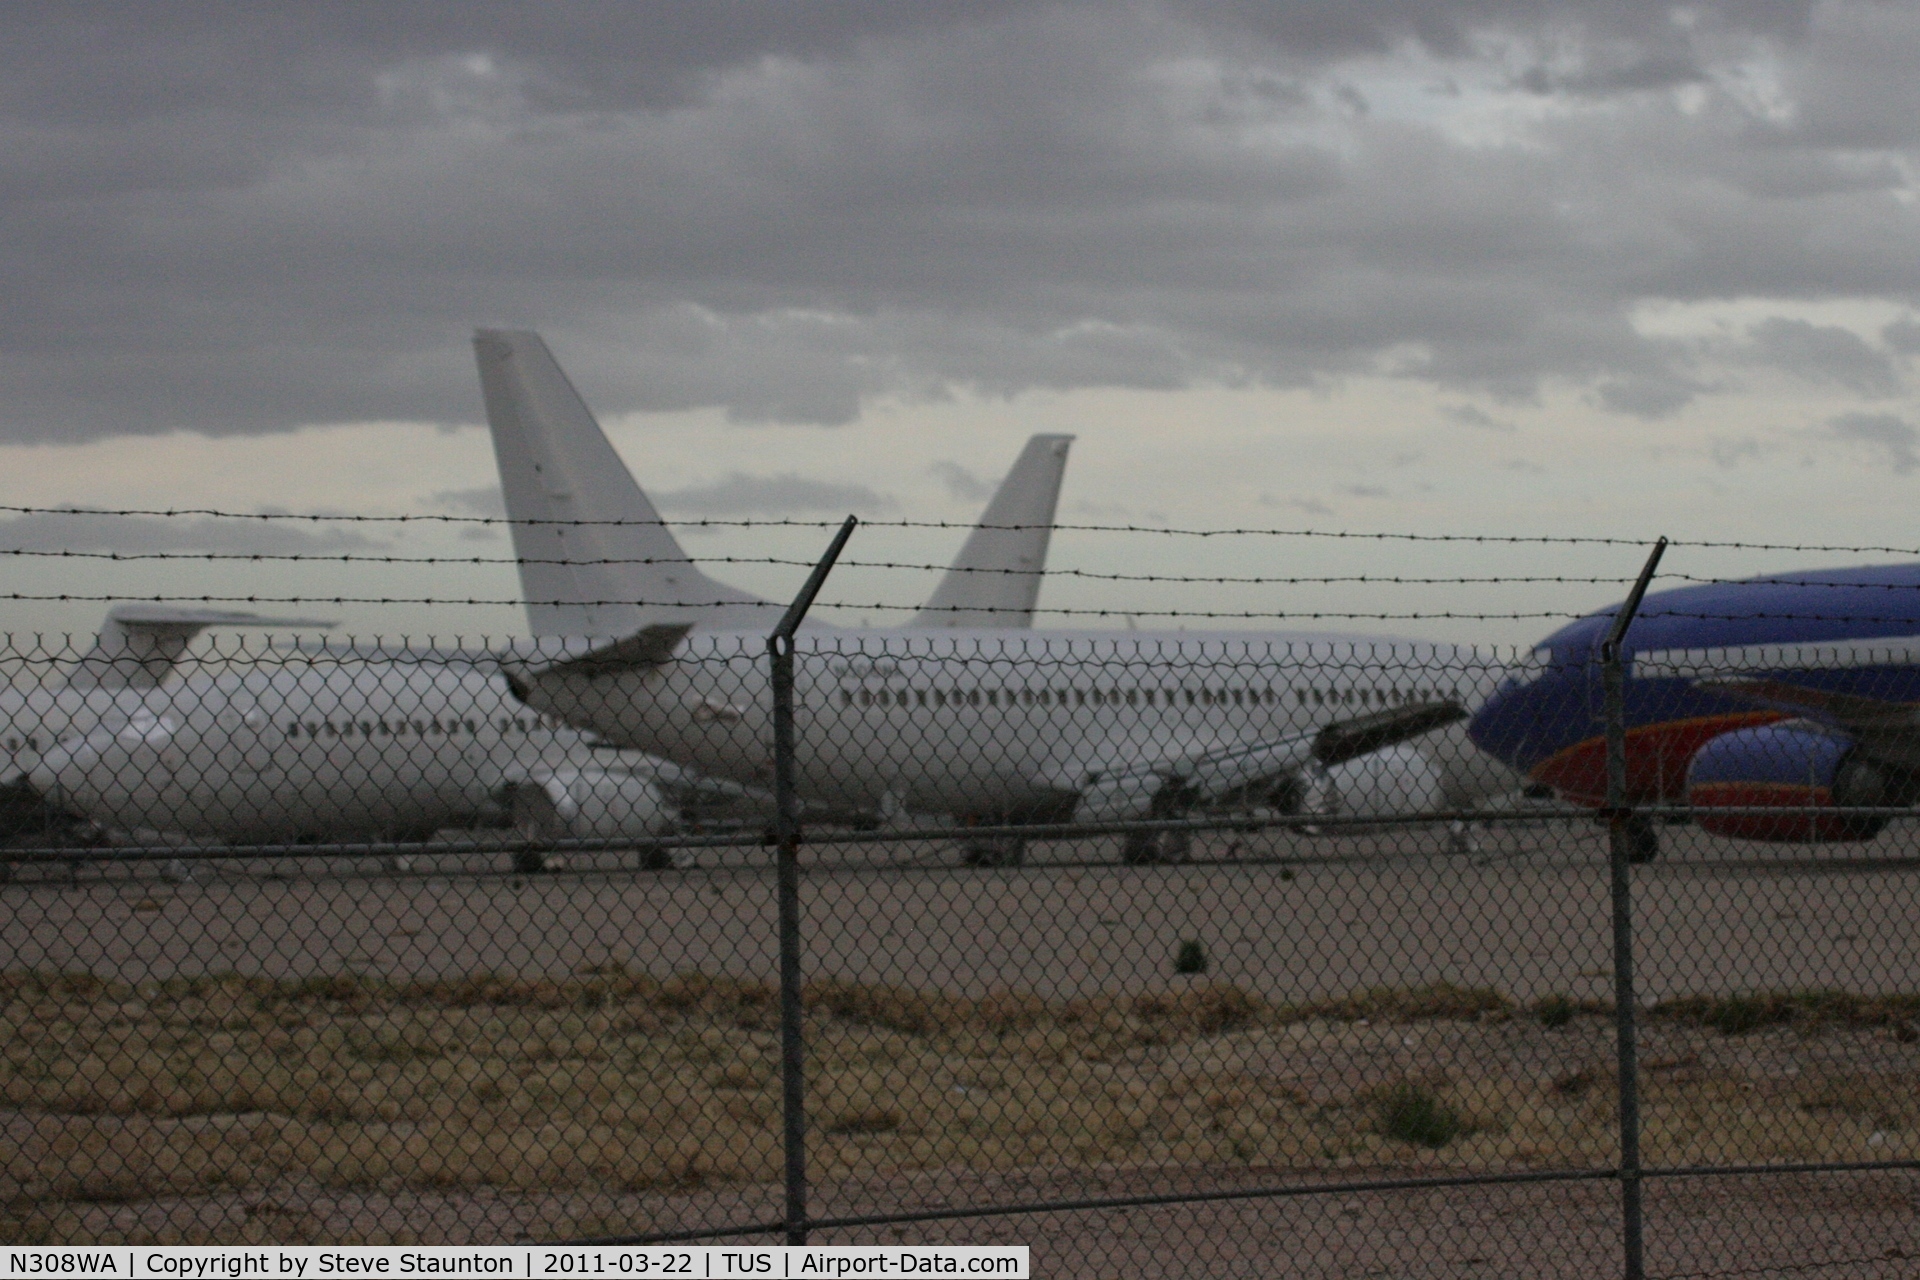 N308WA, 1986 Boeing 737-347 C/N 23441, Taken at Tucson Airport, in March 2011 whilst on an Aeroprint Aviation tour